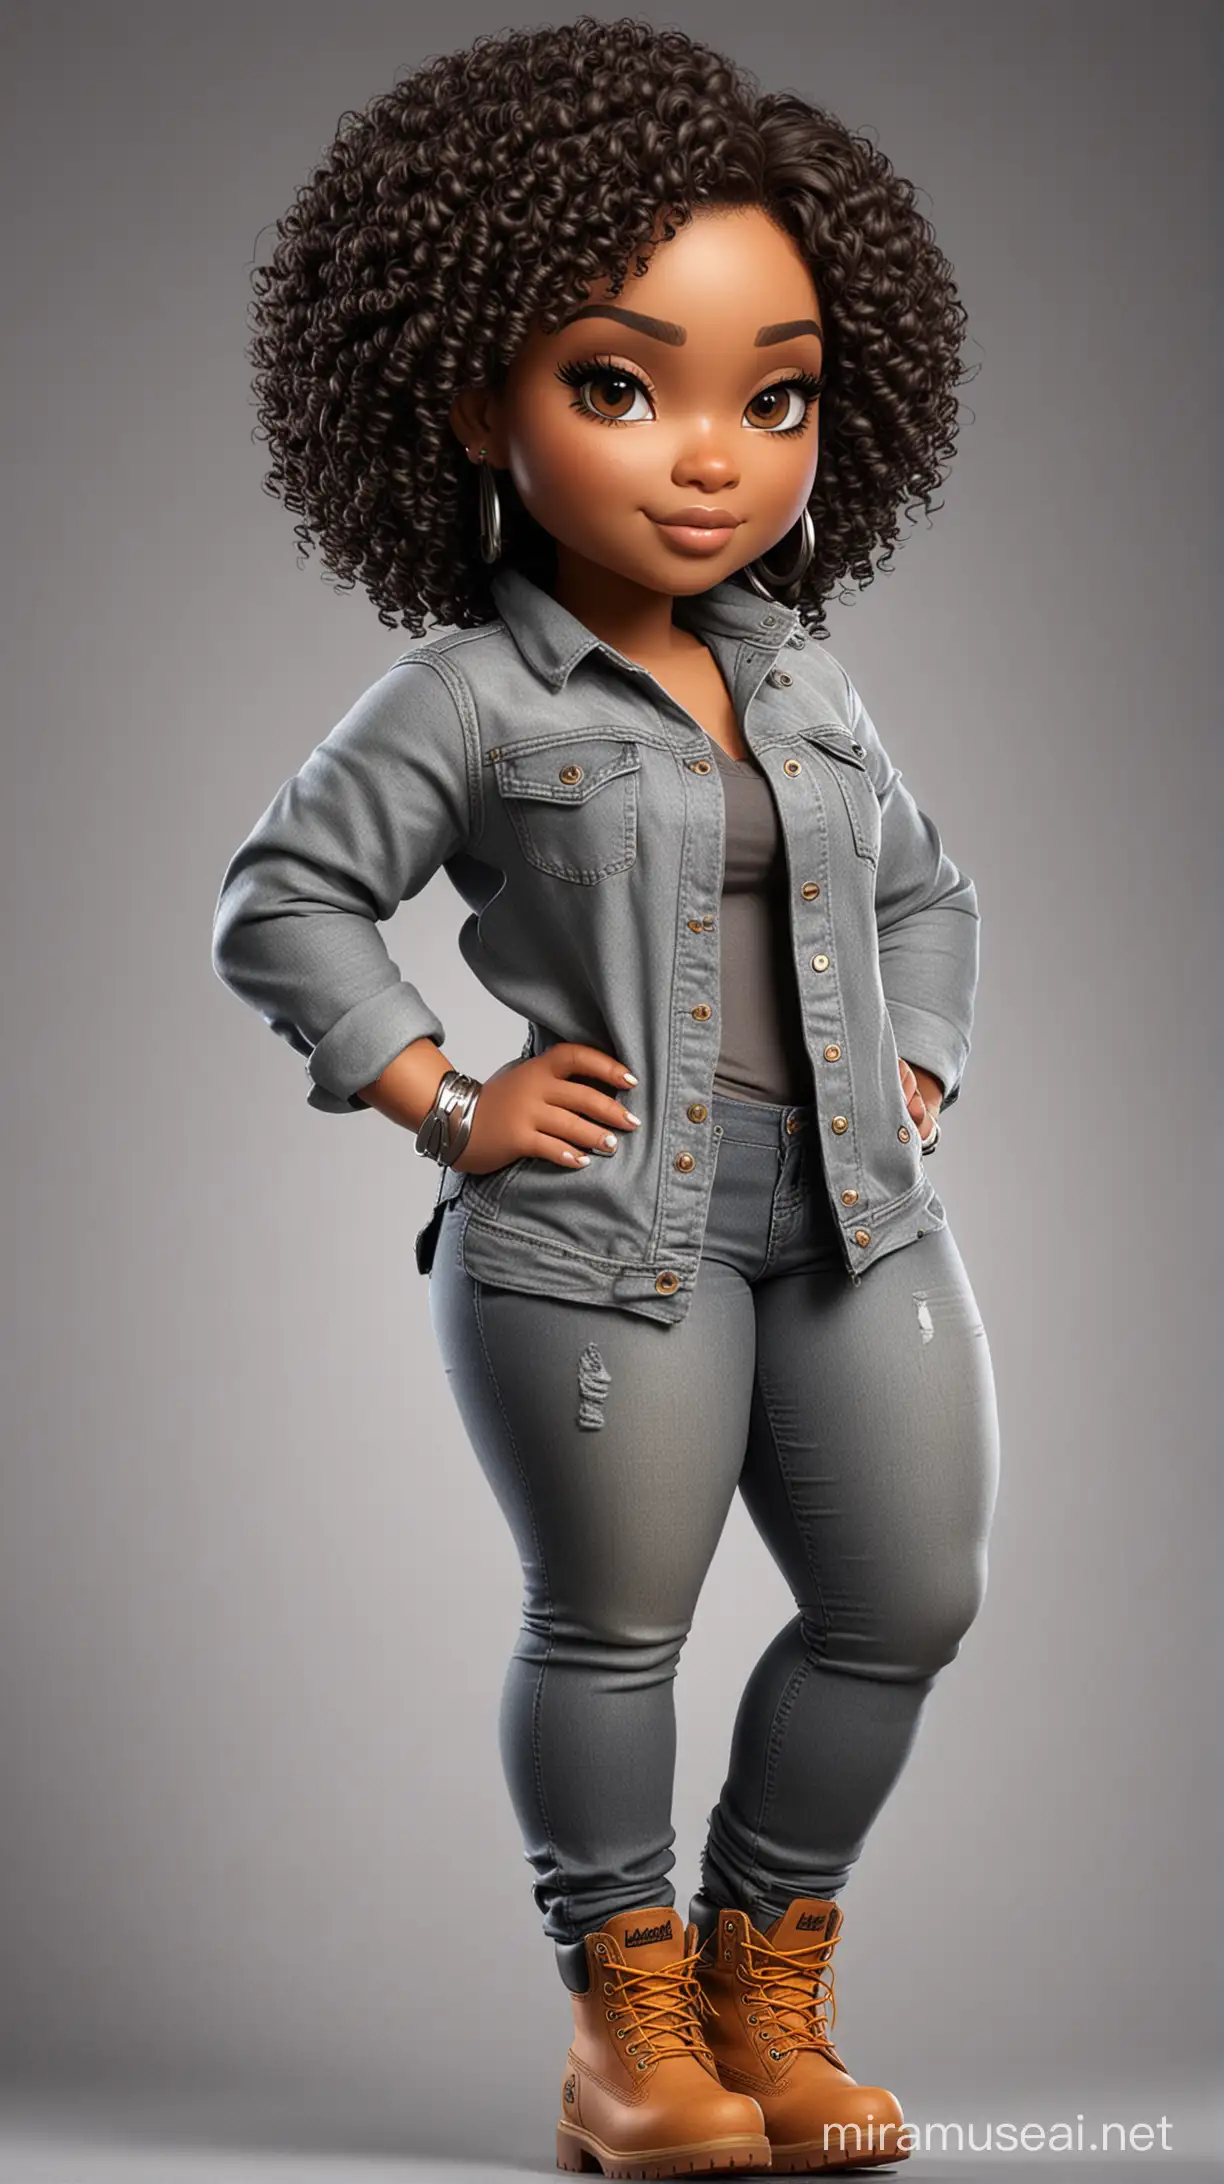 Plus Size Chibi Dark Skinned Black Female in Grey Jean Outfit and Timberland Boots with Detailed Afro